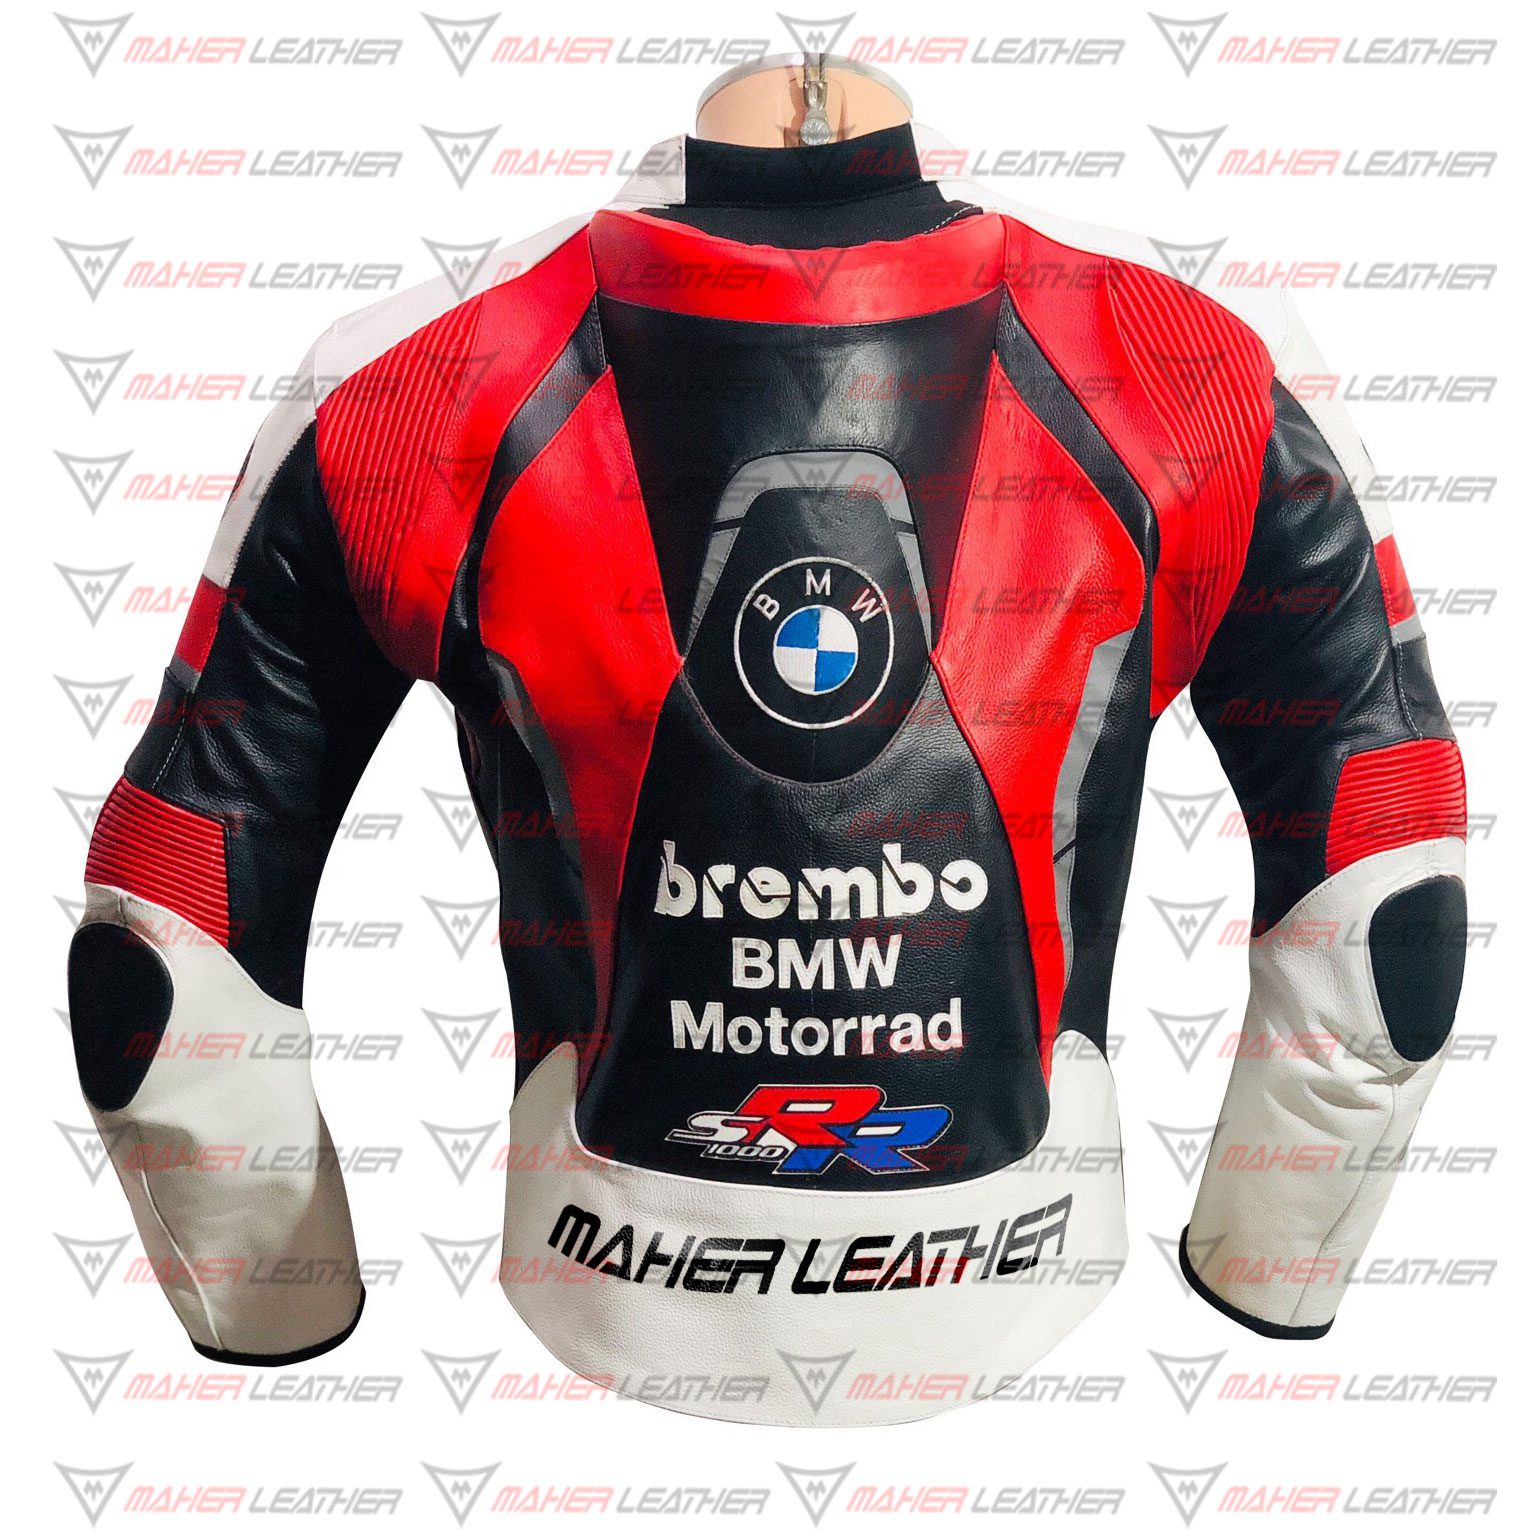 The Back side look of bmw motorcycle jacket